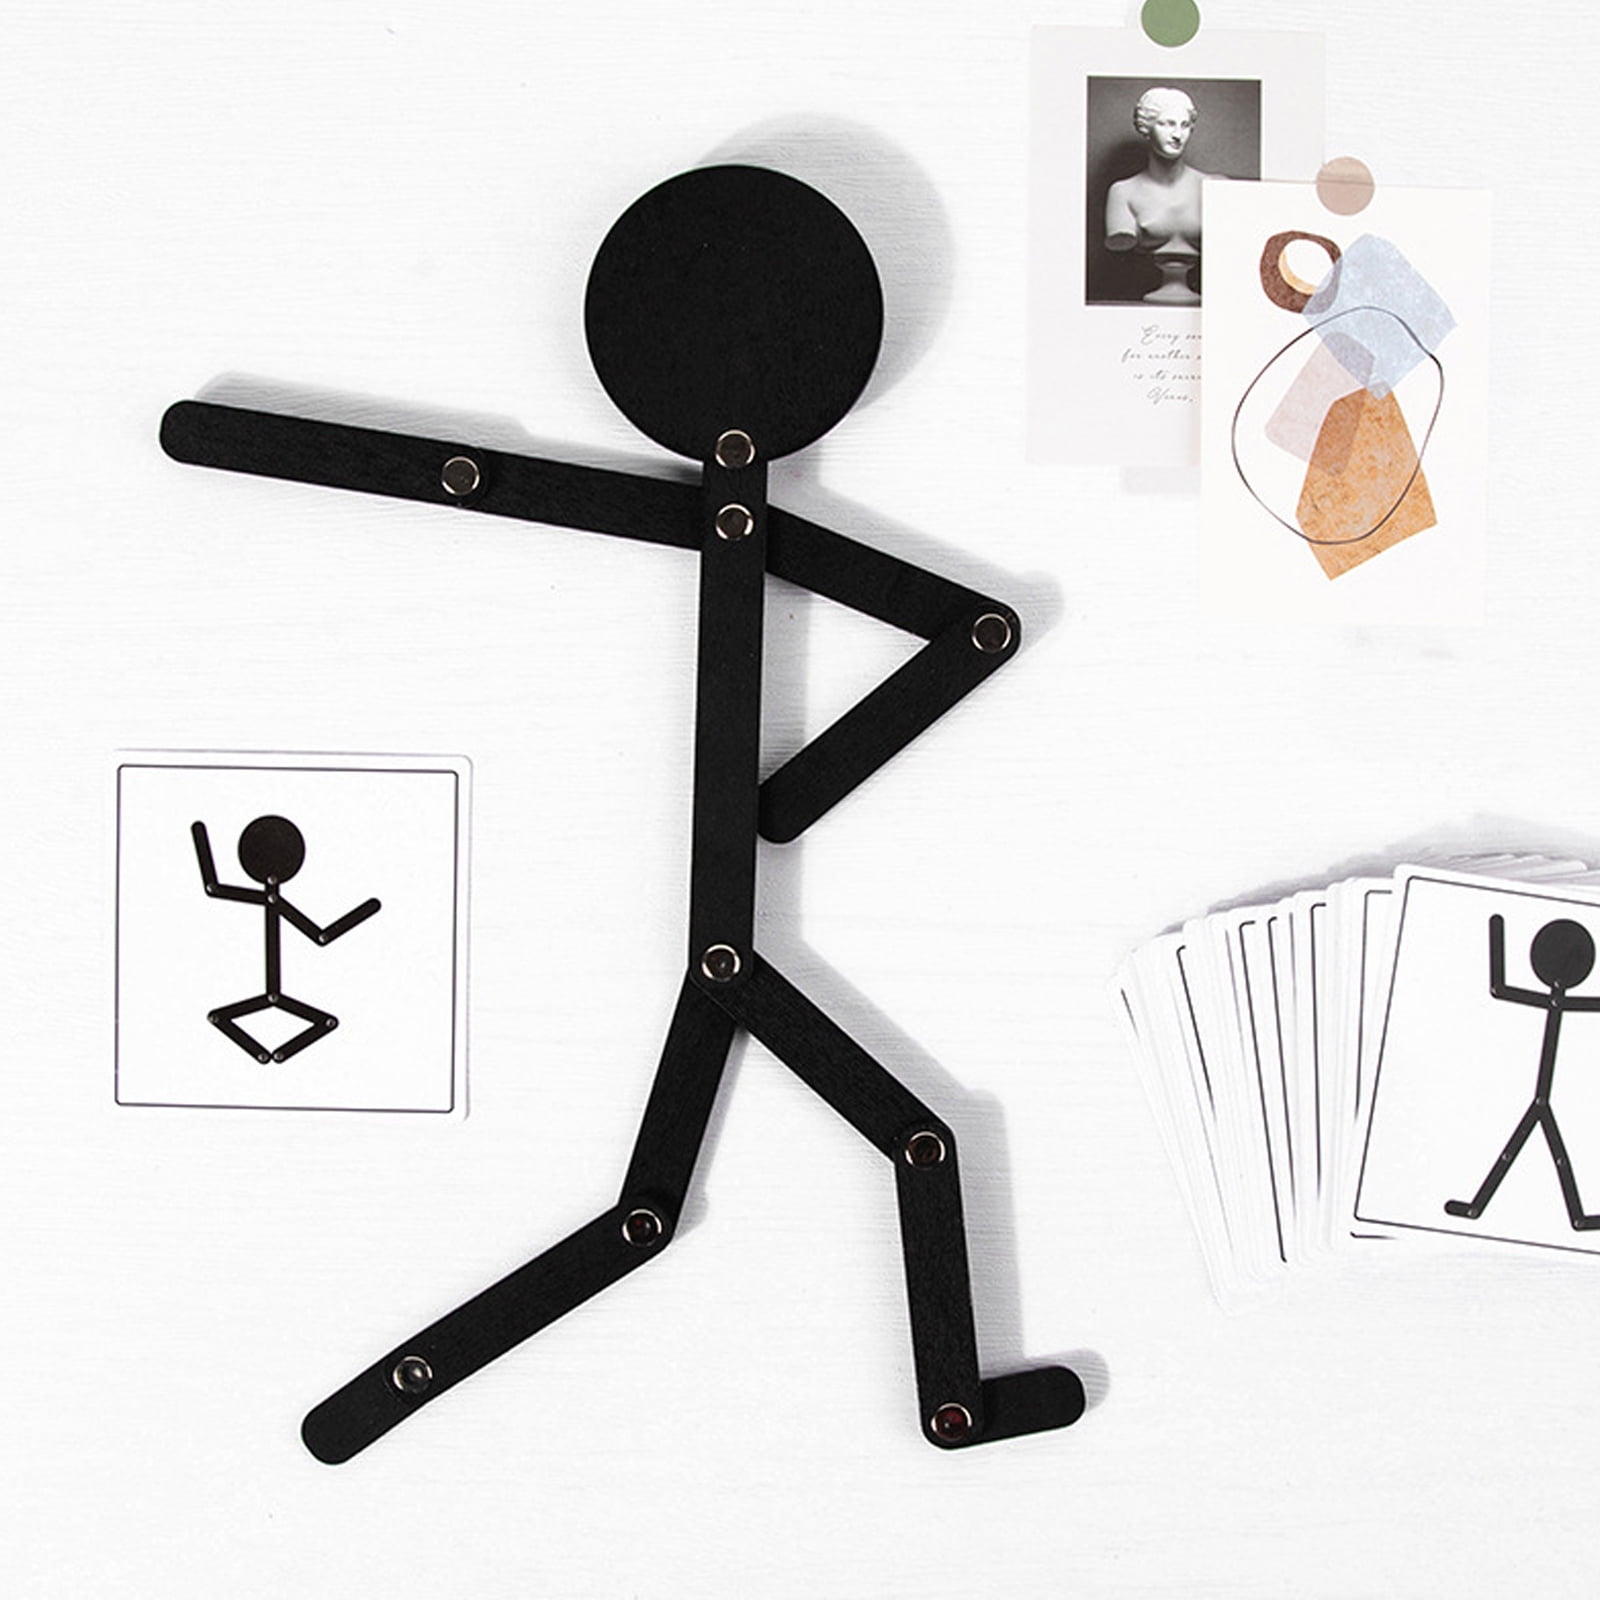 Shanrya Wooden Stickman Toy, Black Wooden Stick Man Toy with 24 Cards Party  Puzzle Toy Educational Game Gift for Above 3 Years Old, ShanryaKJed3p8K